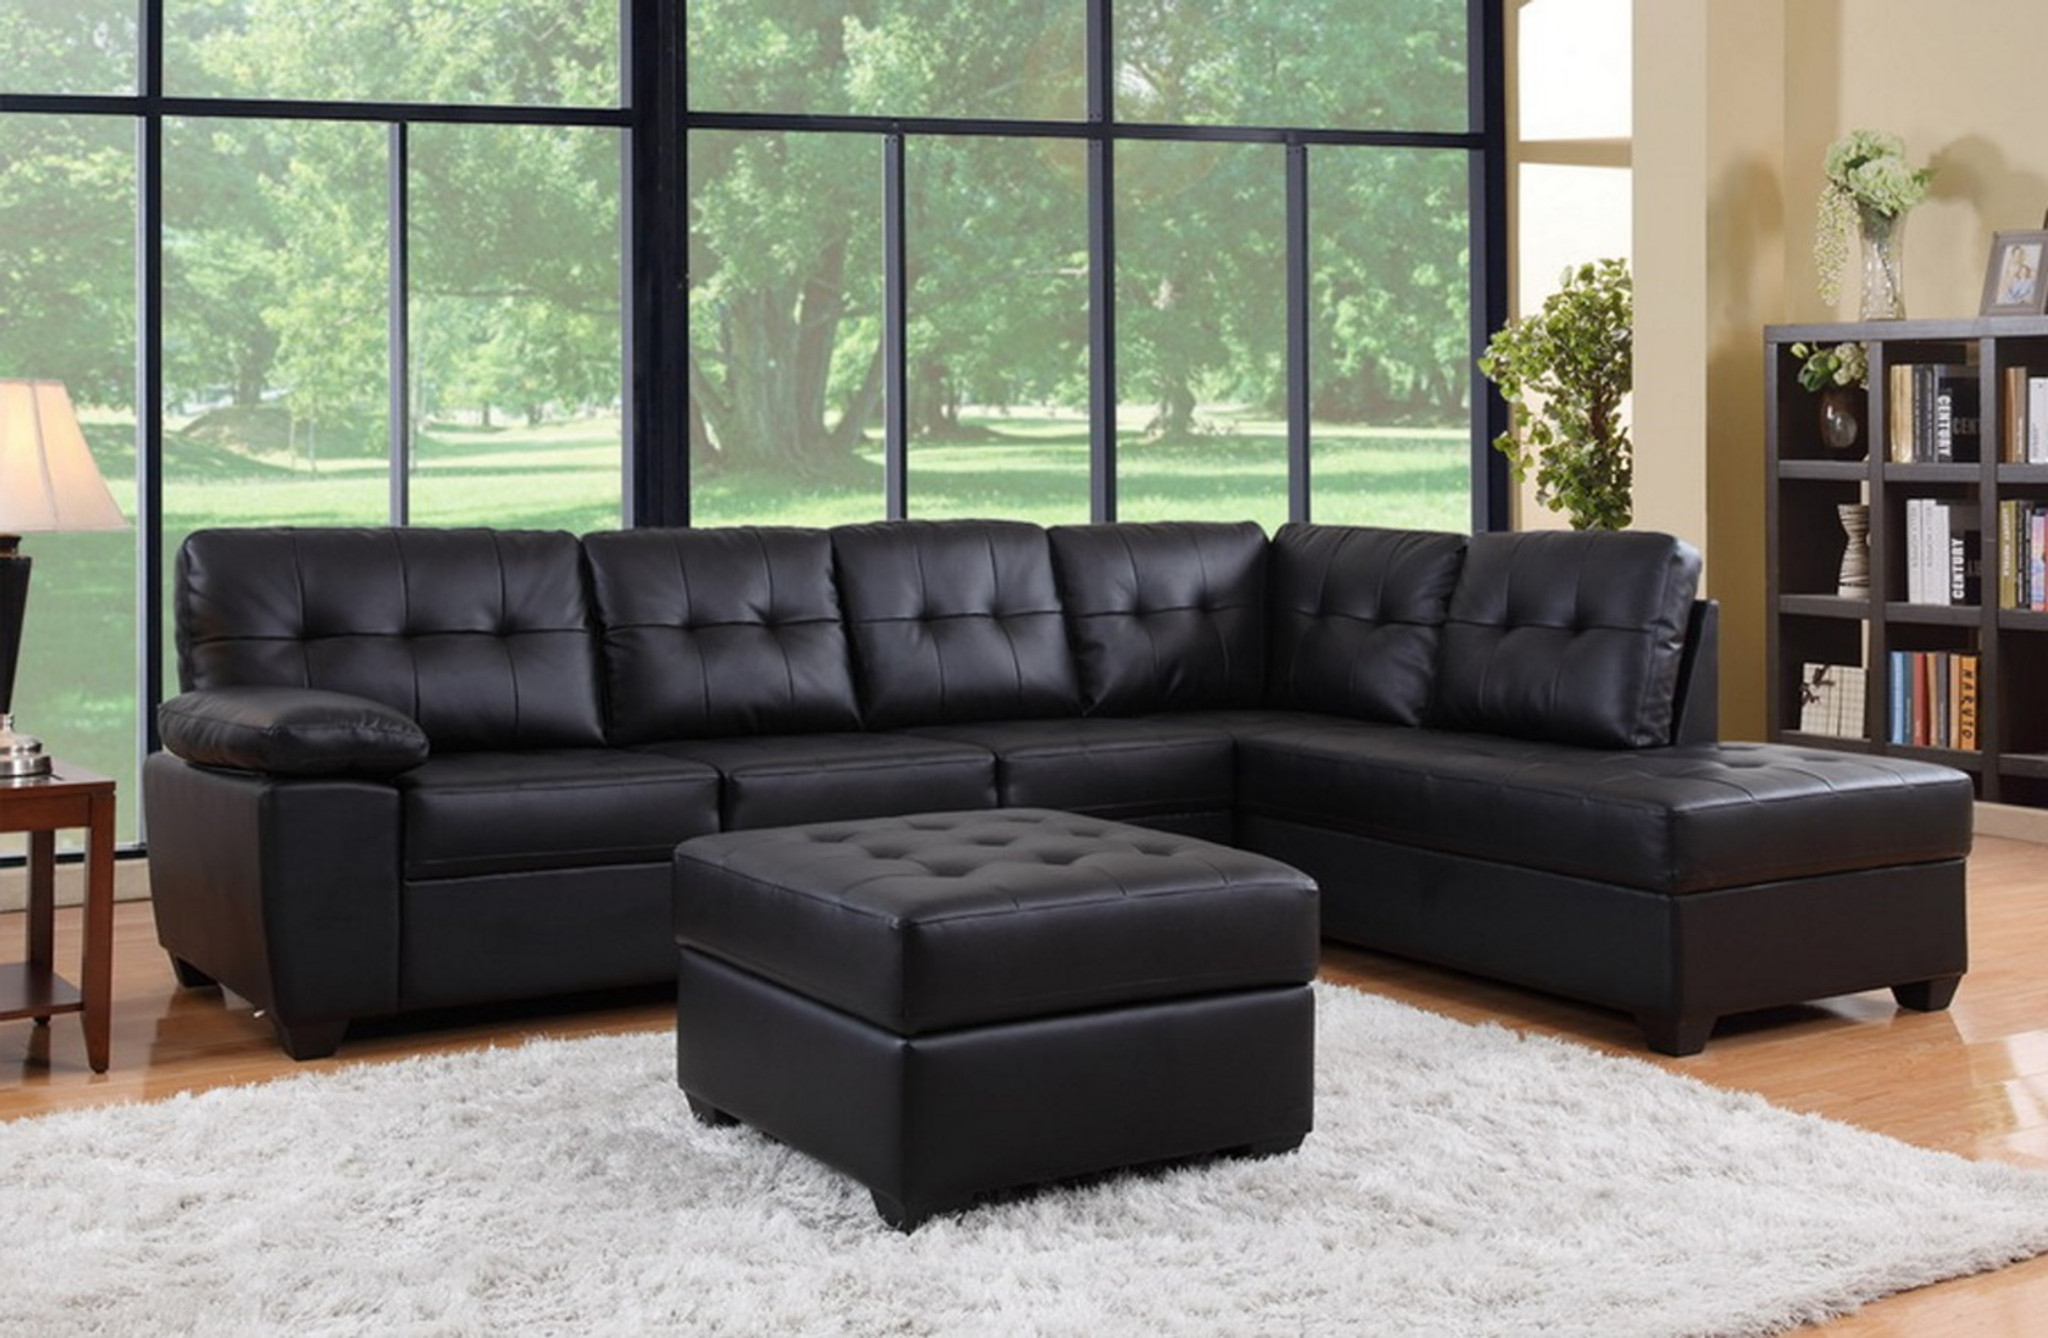 decorate living room black leather sectional